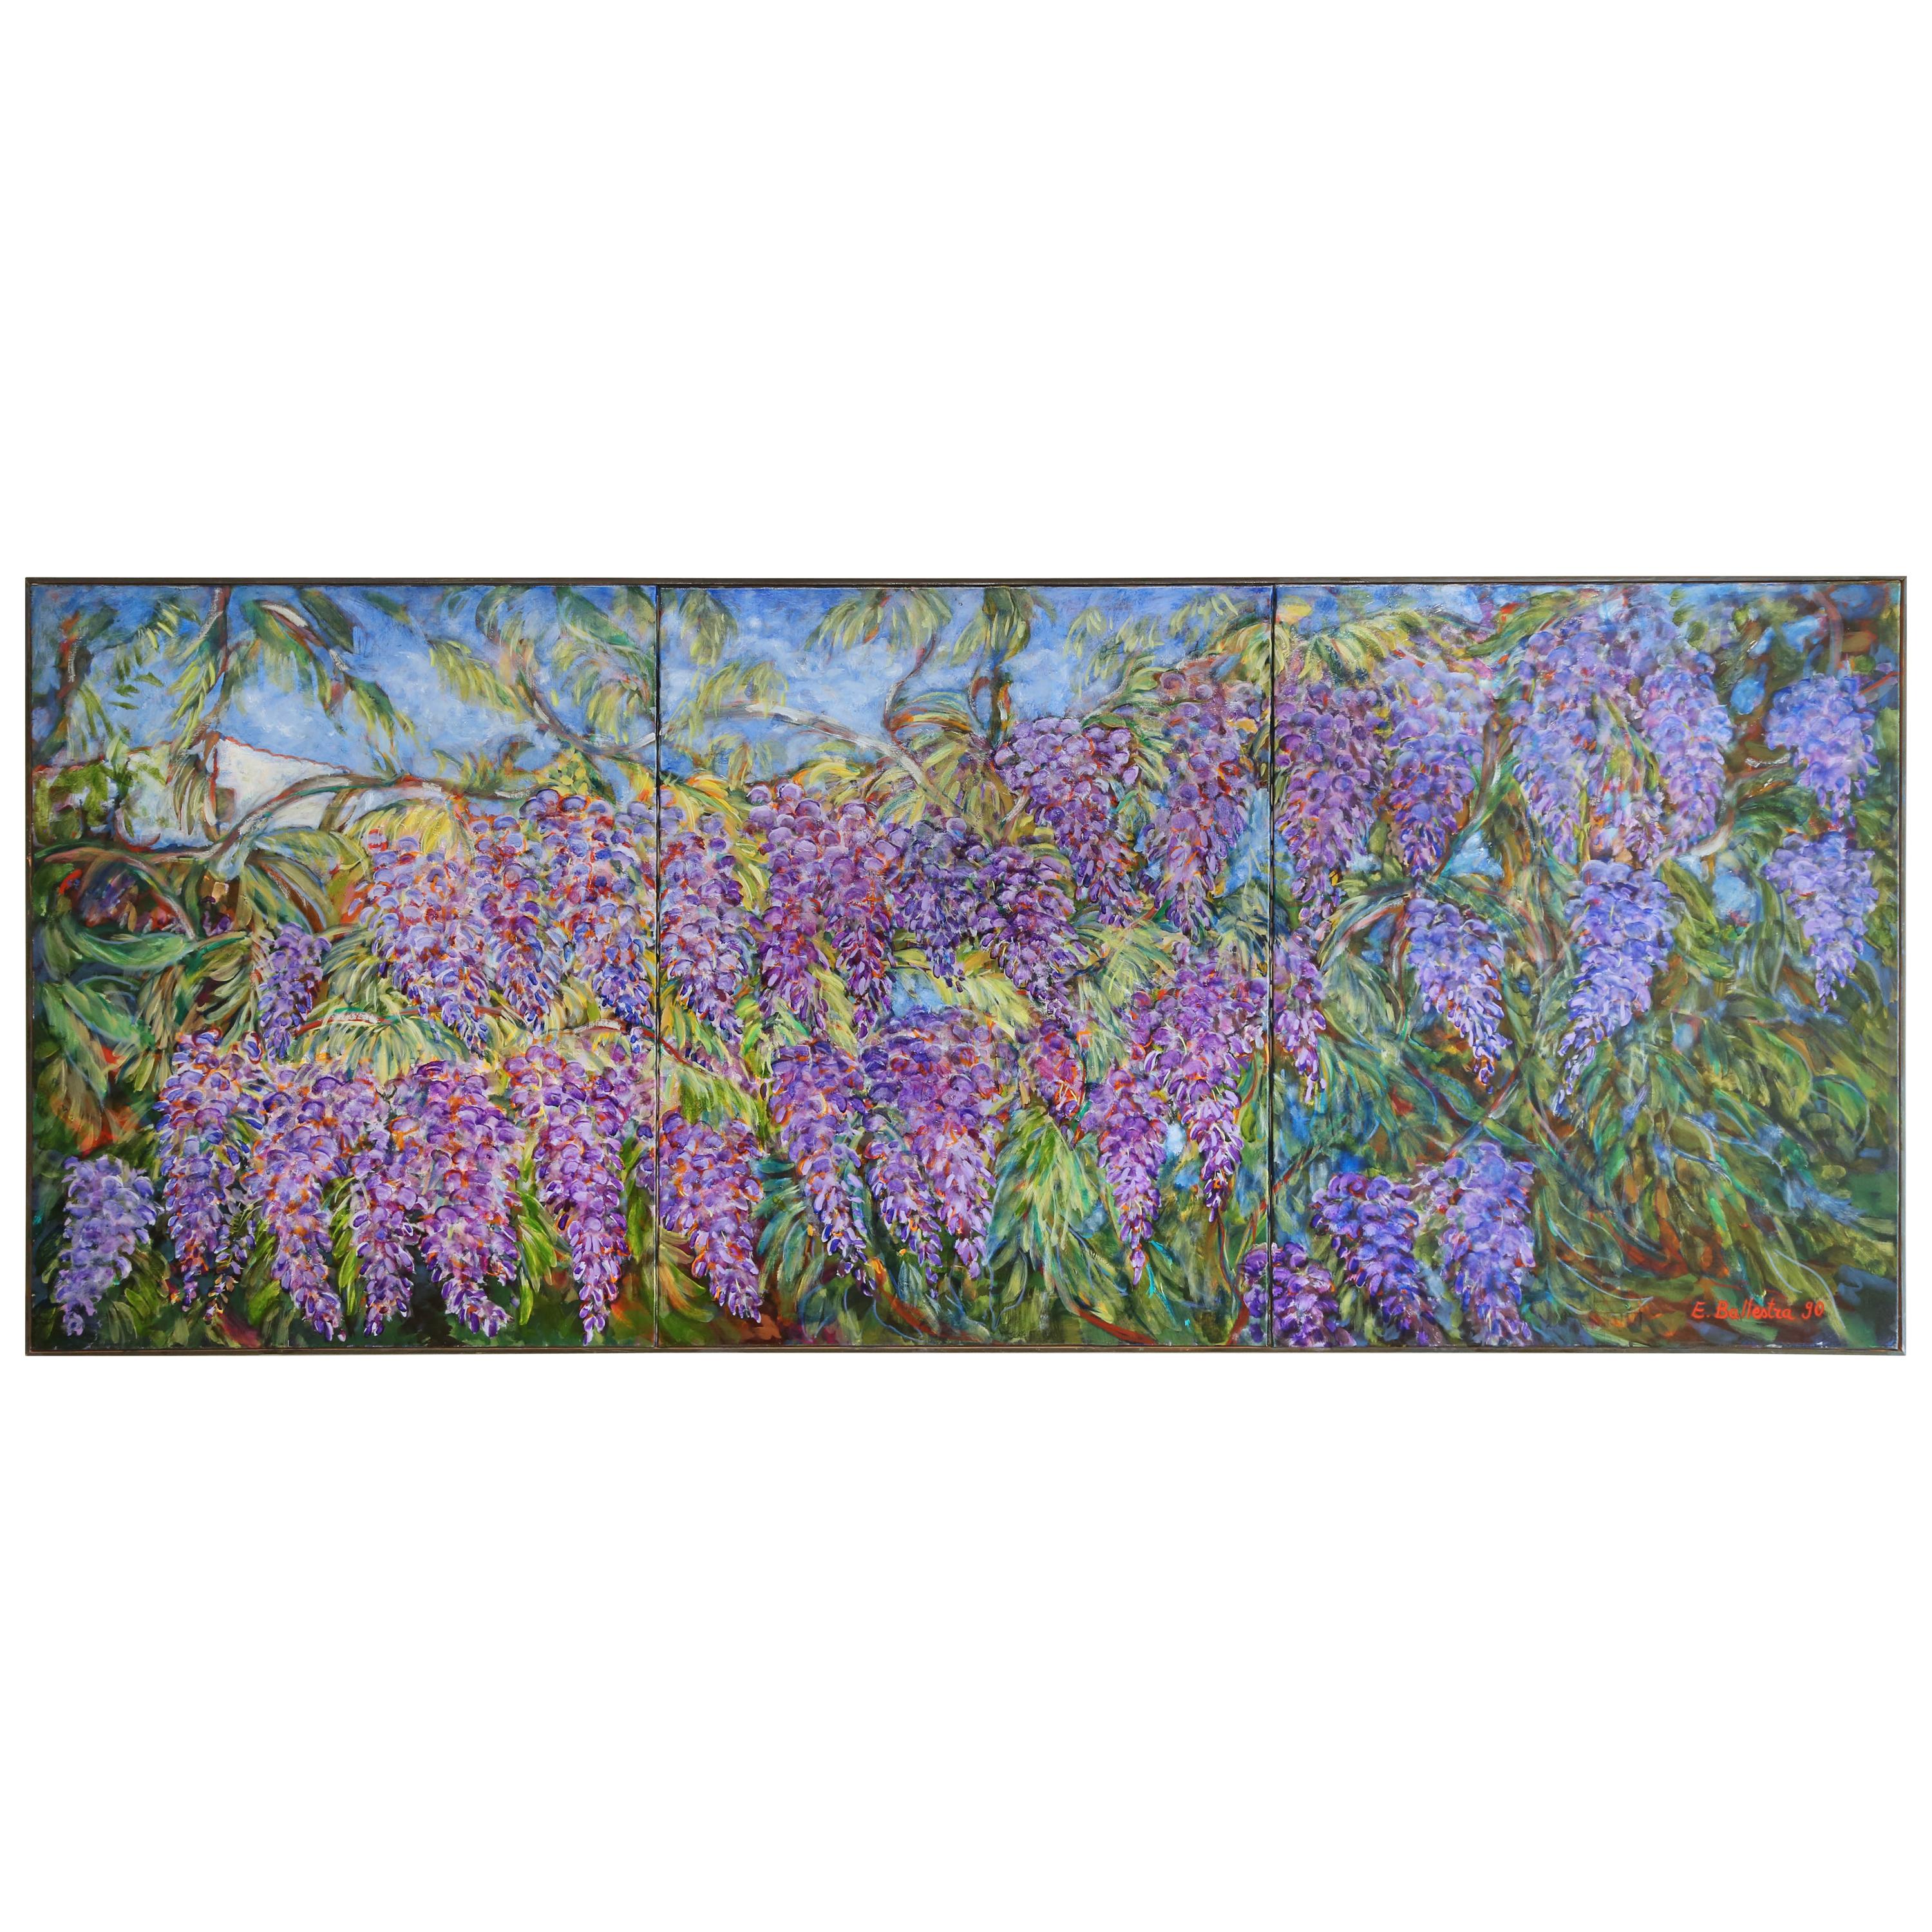 E. Ballestra Oil Painting on Canvas Wisteria Branches